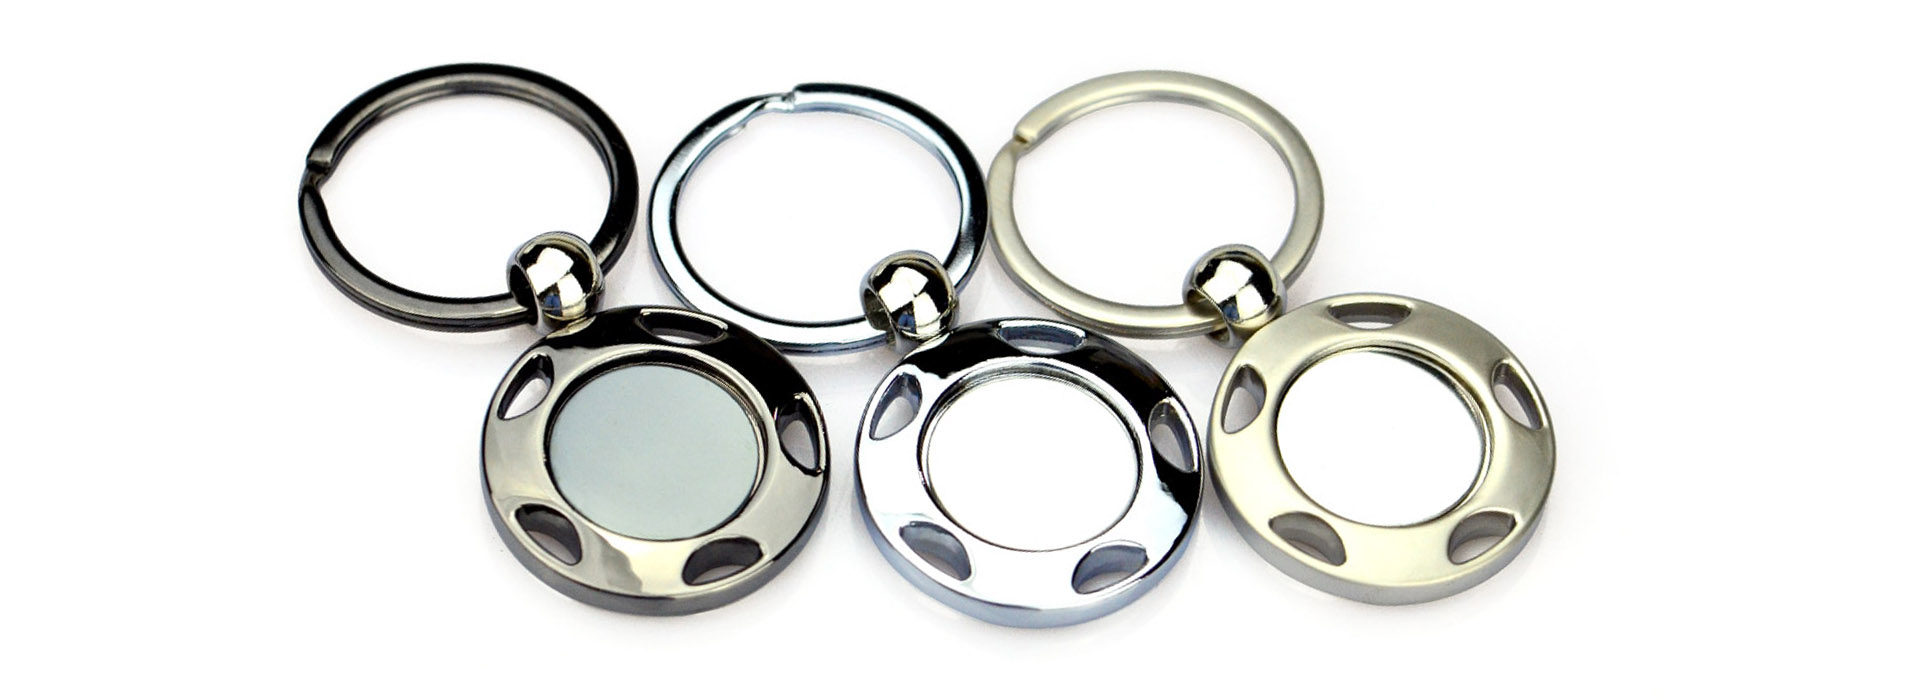 ArtiGifts: Crafting Excellence with Custom Metal Keychain Accessories Alloy from Our State-of-the-Art Factory